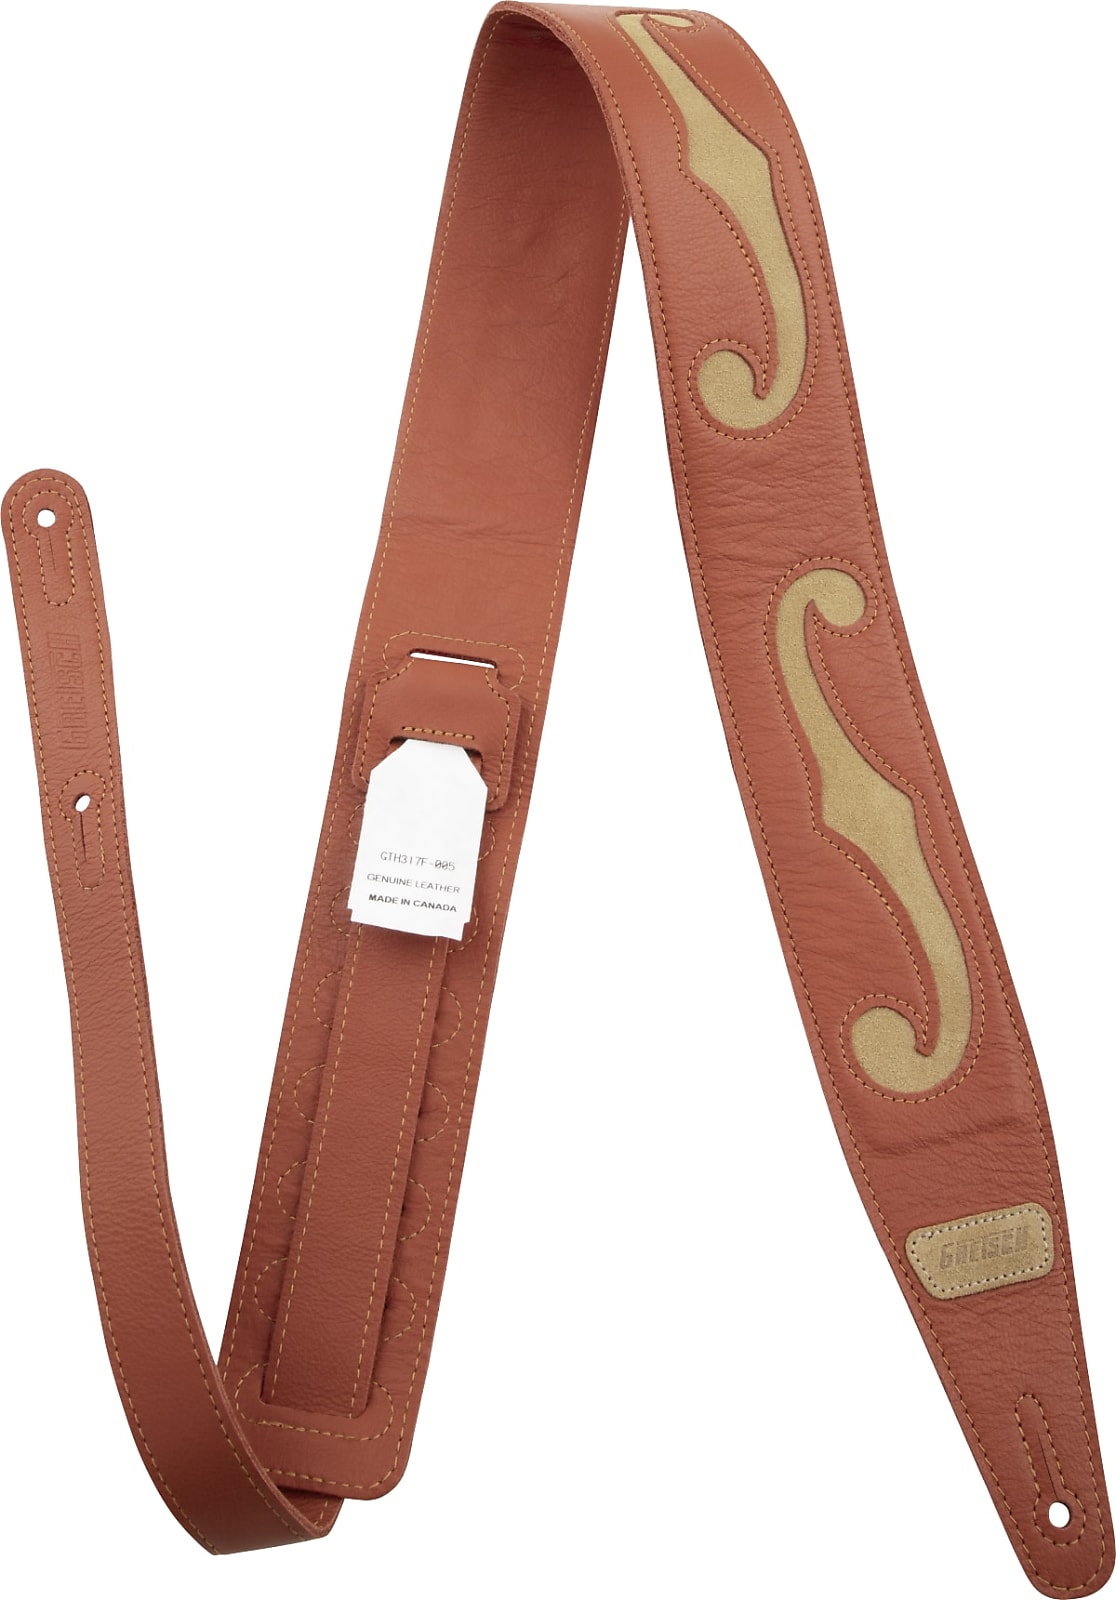 Gretsch F-Holes Leather Strap, Orange and Tan 3"